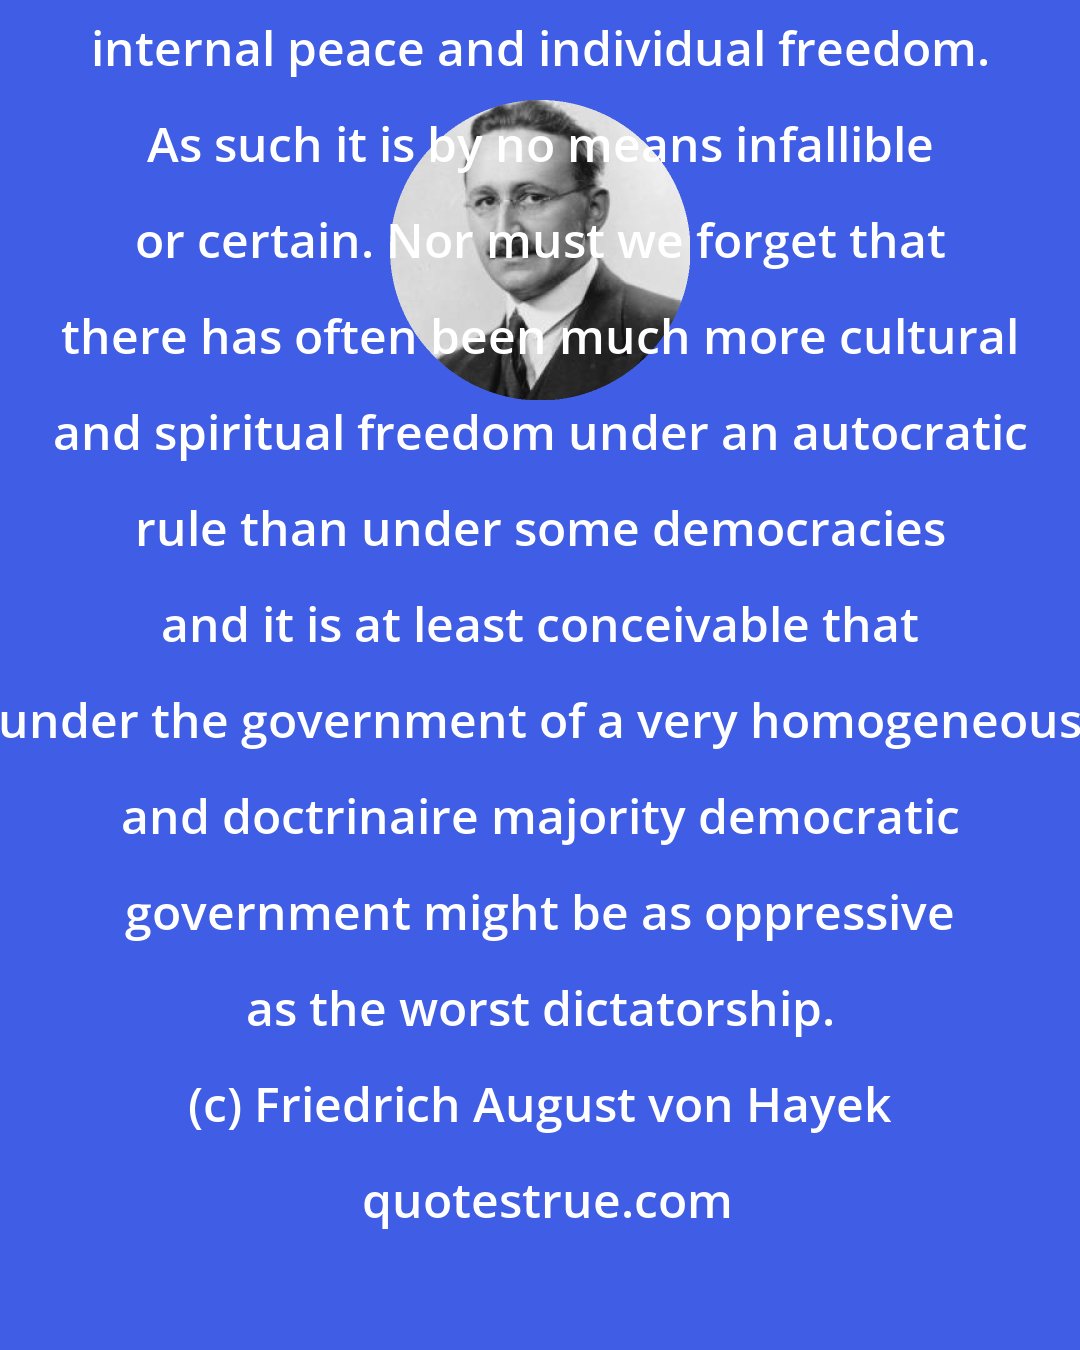 Friedrich August von Hayek: Democracy is essentially a means, a utilitarian device for safeguarding internal peace and individual freedom. As such it is by no means infallible or certain. Nor must we forget that there has often been much more cultural and spiritual freedom under an autocratic rule than under some democracies and it is at least conceivable that under the government of a very homogeneous and doctrinaire majority democratic government might be as oppressive as the worst dictatorship.